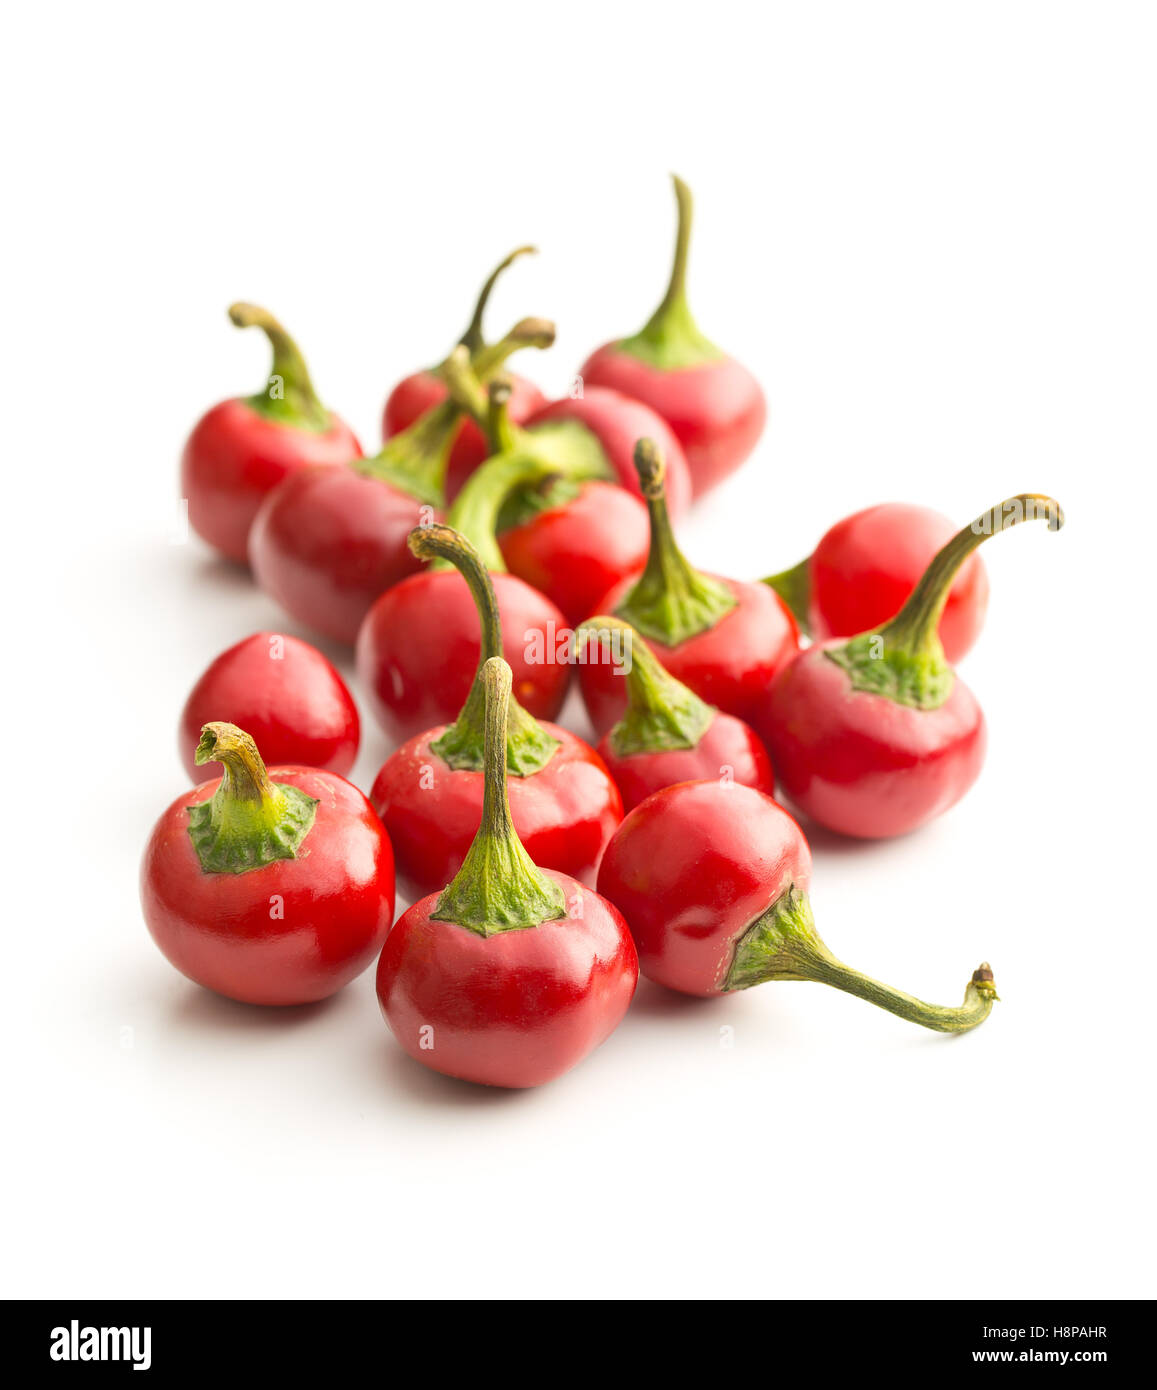 Round chili peppers isolated on white background. Stock Photo